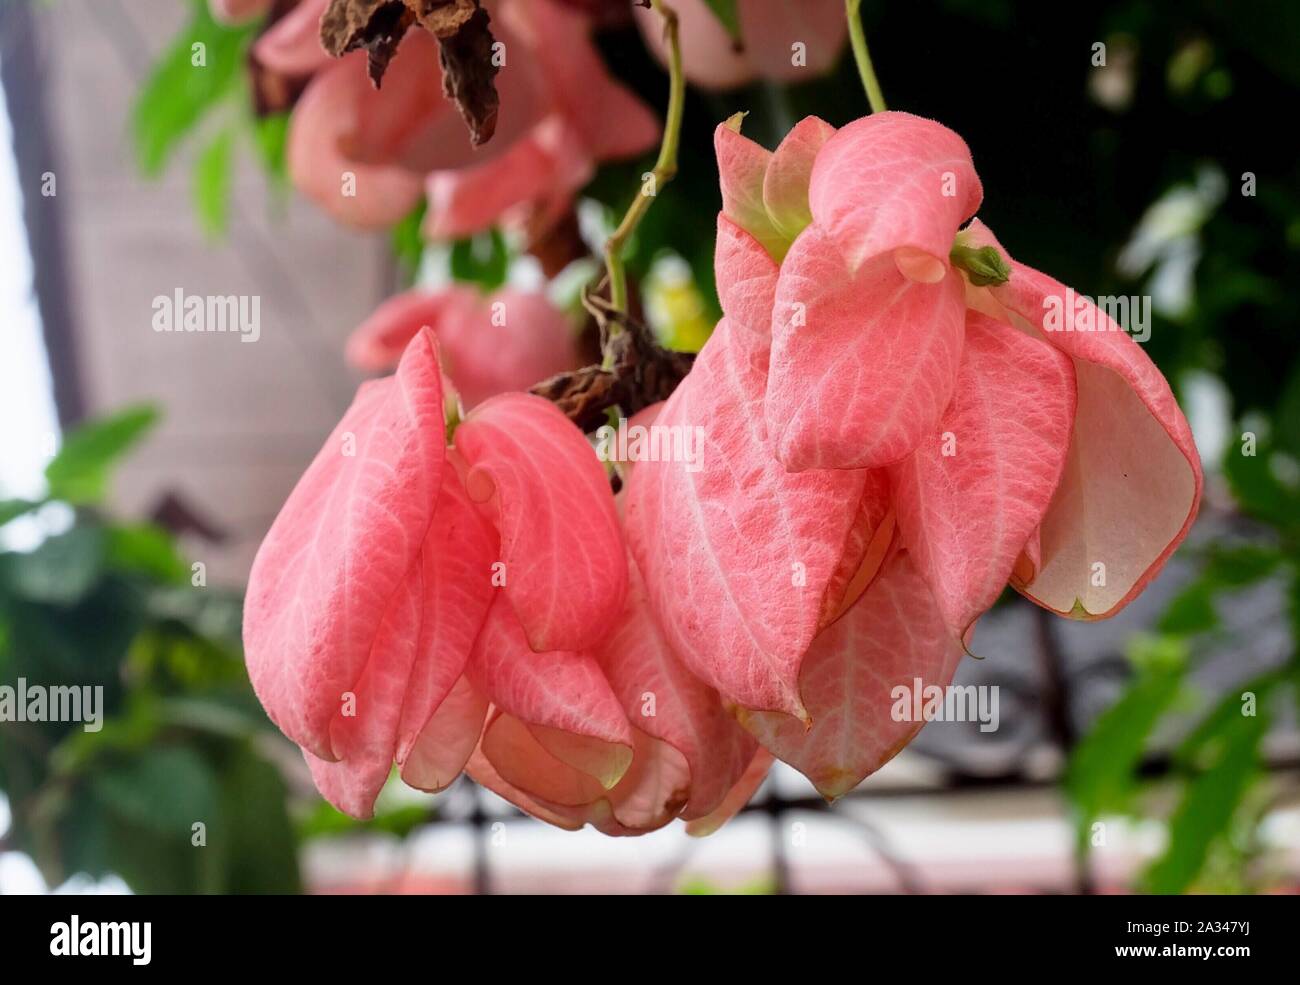 Bunch of Fresh Old Rose Mussaenda Philippica or Donna Queen Sirikit Flowers on Green Tree. Stock Photo